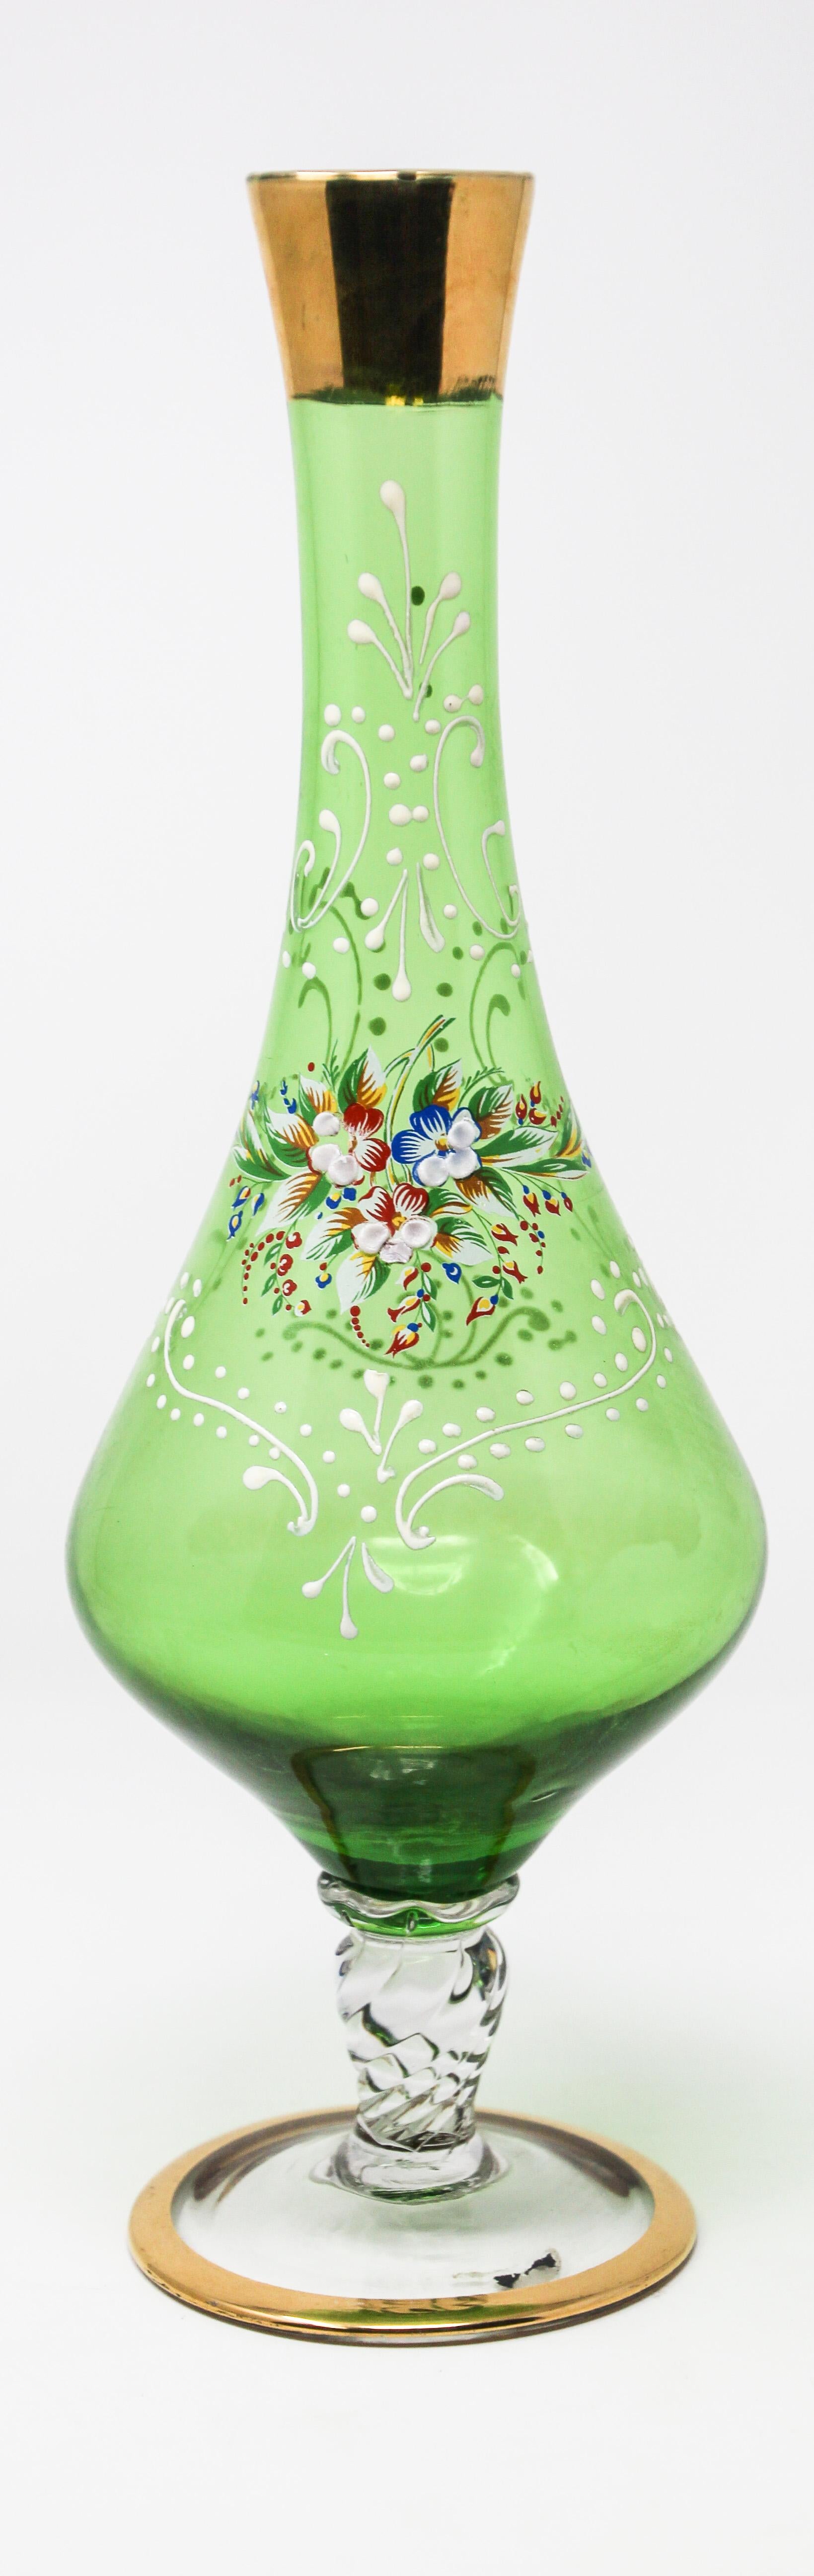 Bohemian emerald green glass gilded and enameled vase Moser style with hand painted gold floral design.
A boho glass art piece handcrafted by master glassmakers in the Czech Republic.